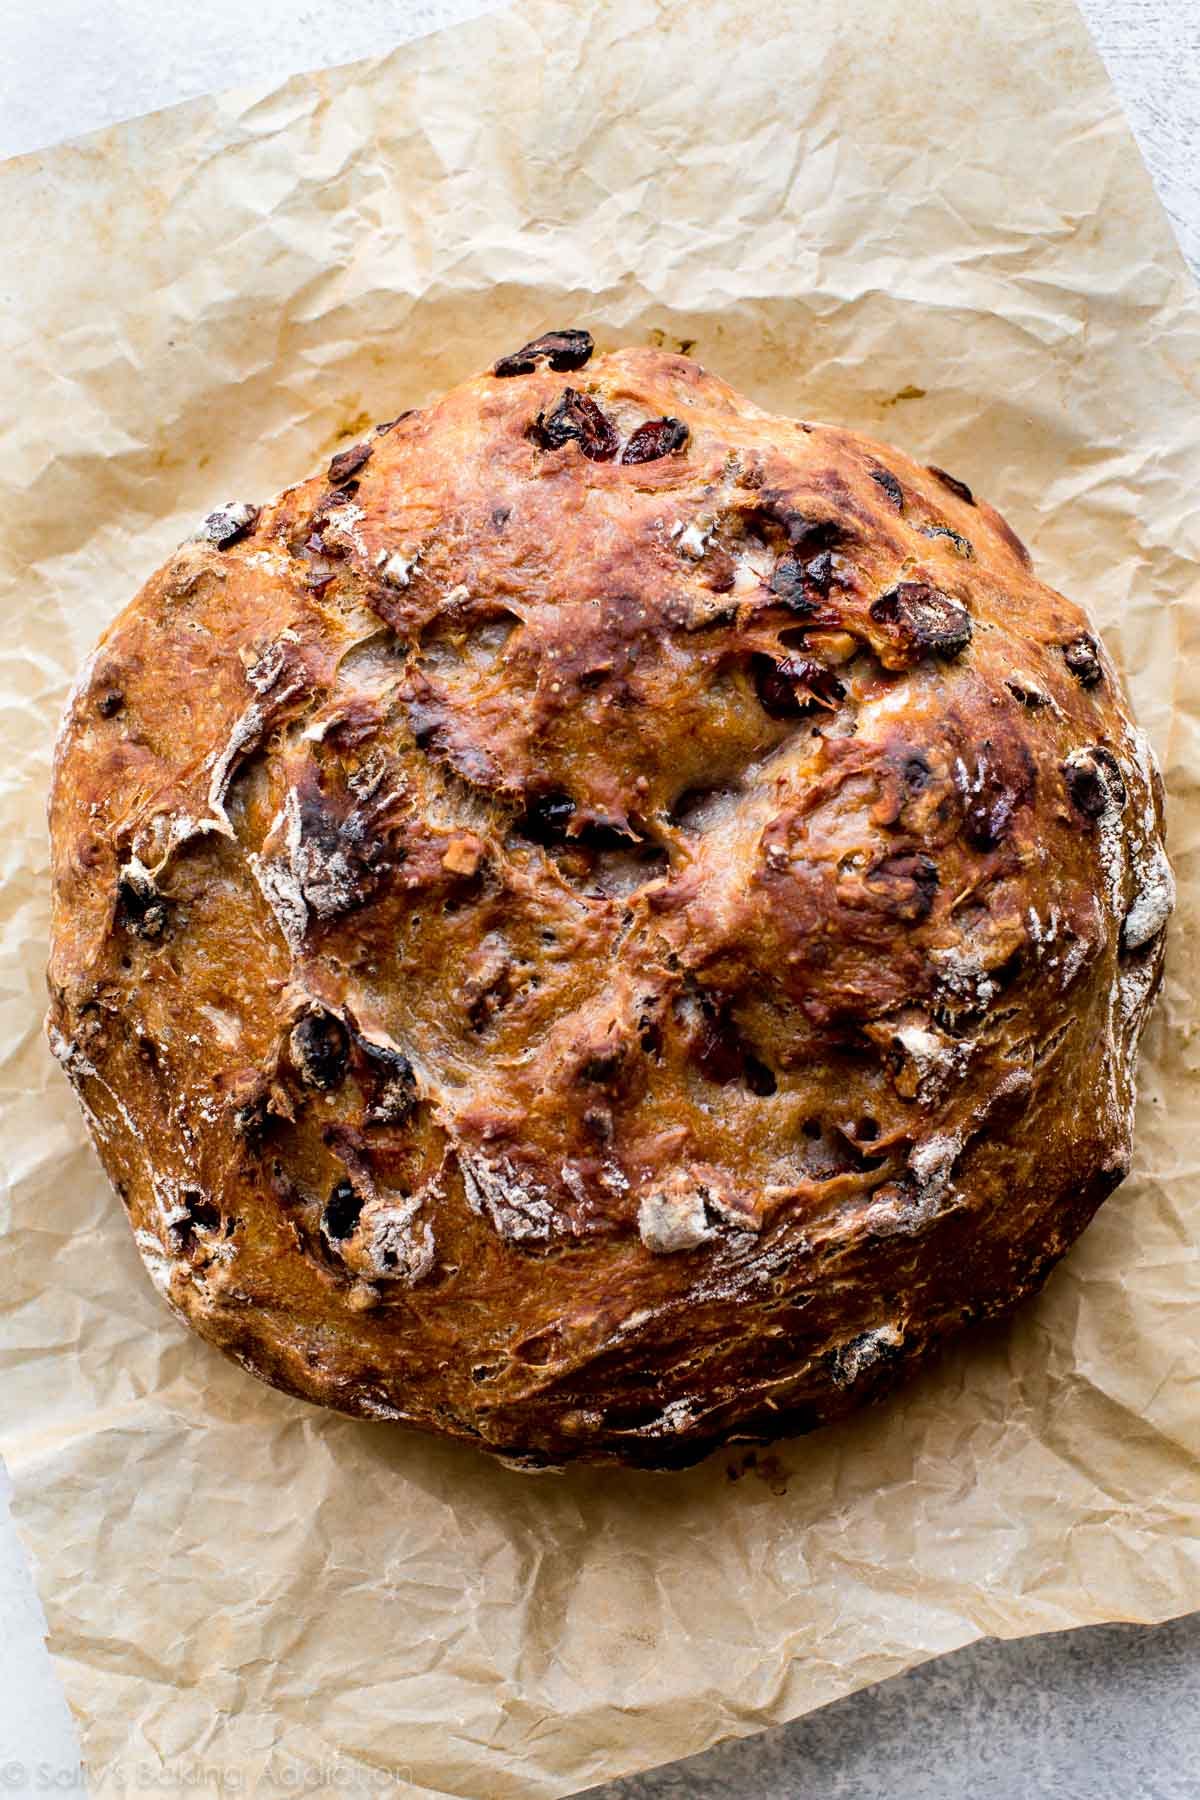 No-knead super crusty, soft, and EASY bread made in the dutch oven! Filled with dried cranberries and walnuts, the bread is delicious! Recipe on sallysbakingaddiction.com